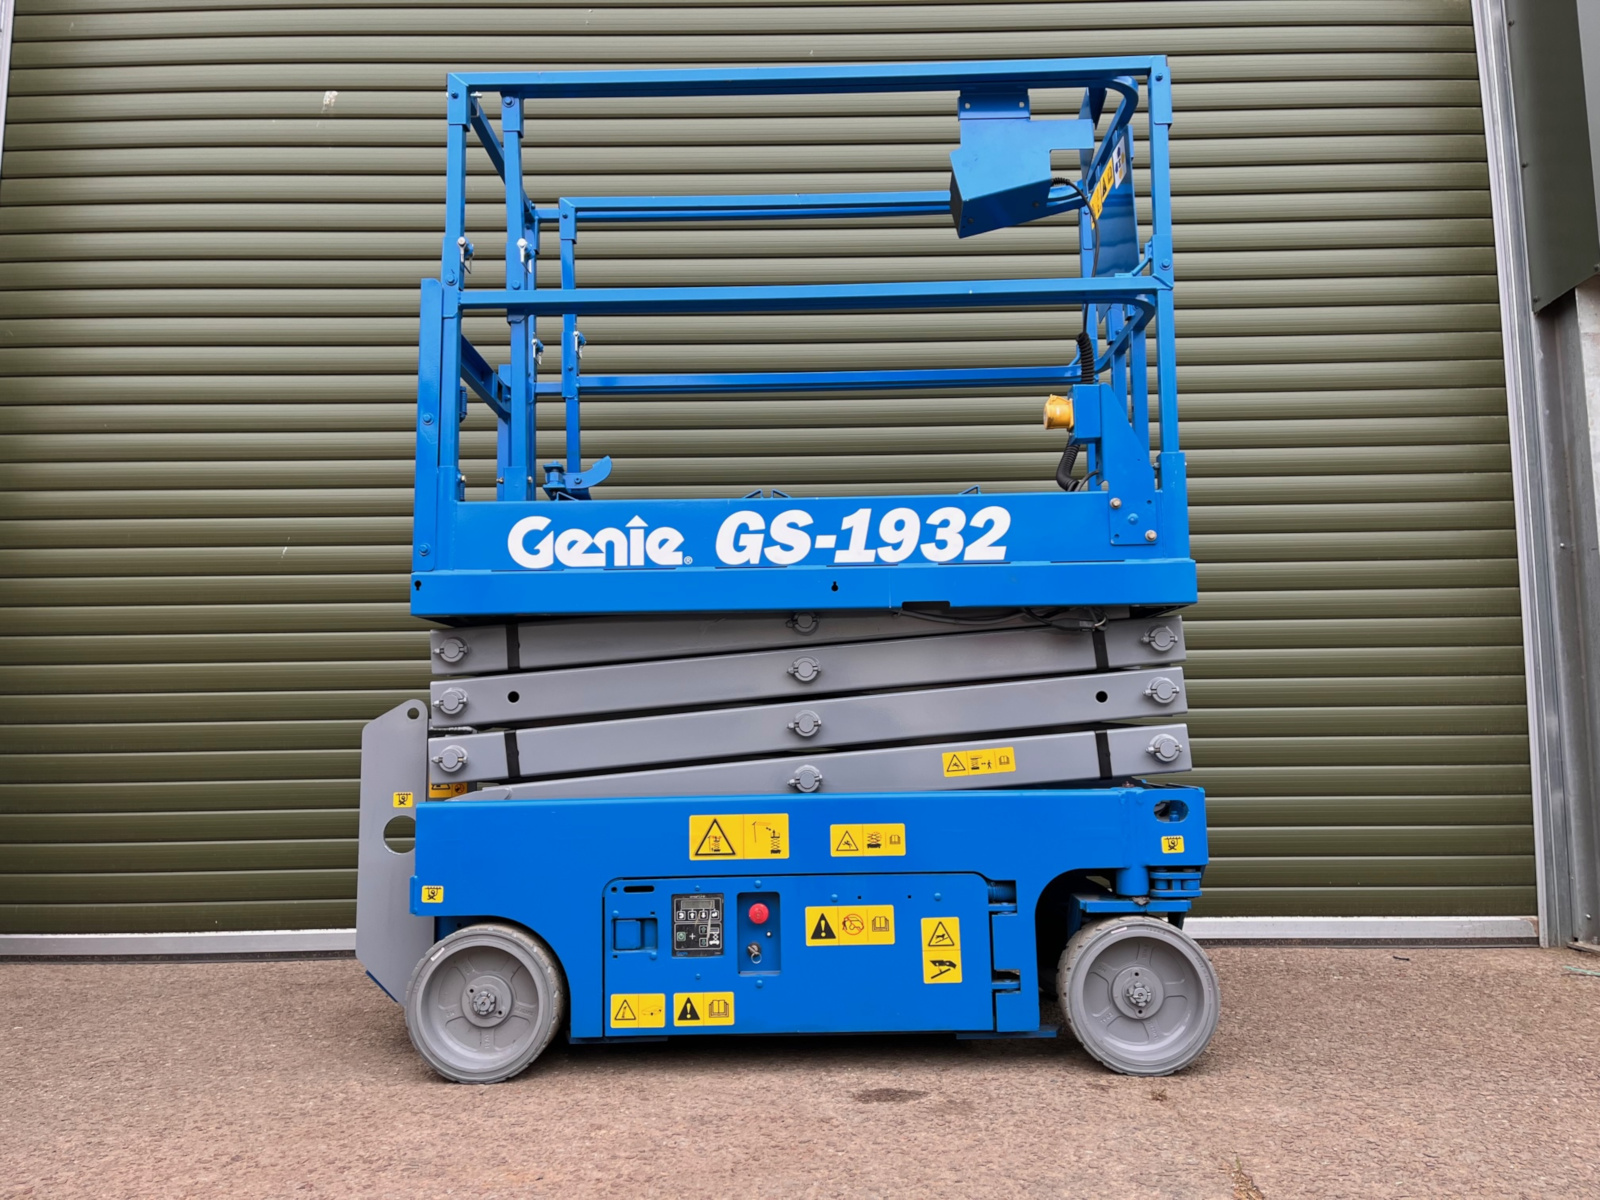 An image of 2013 Repainted Genie GS1932 DC Scissor Lift goes here.